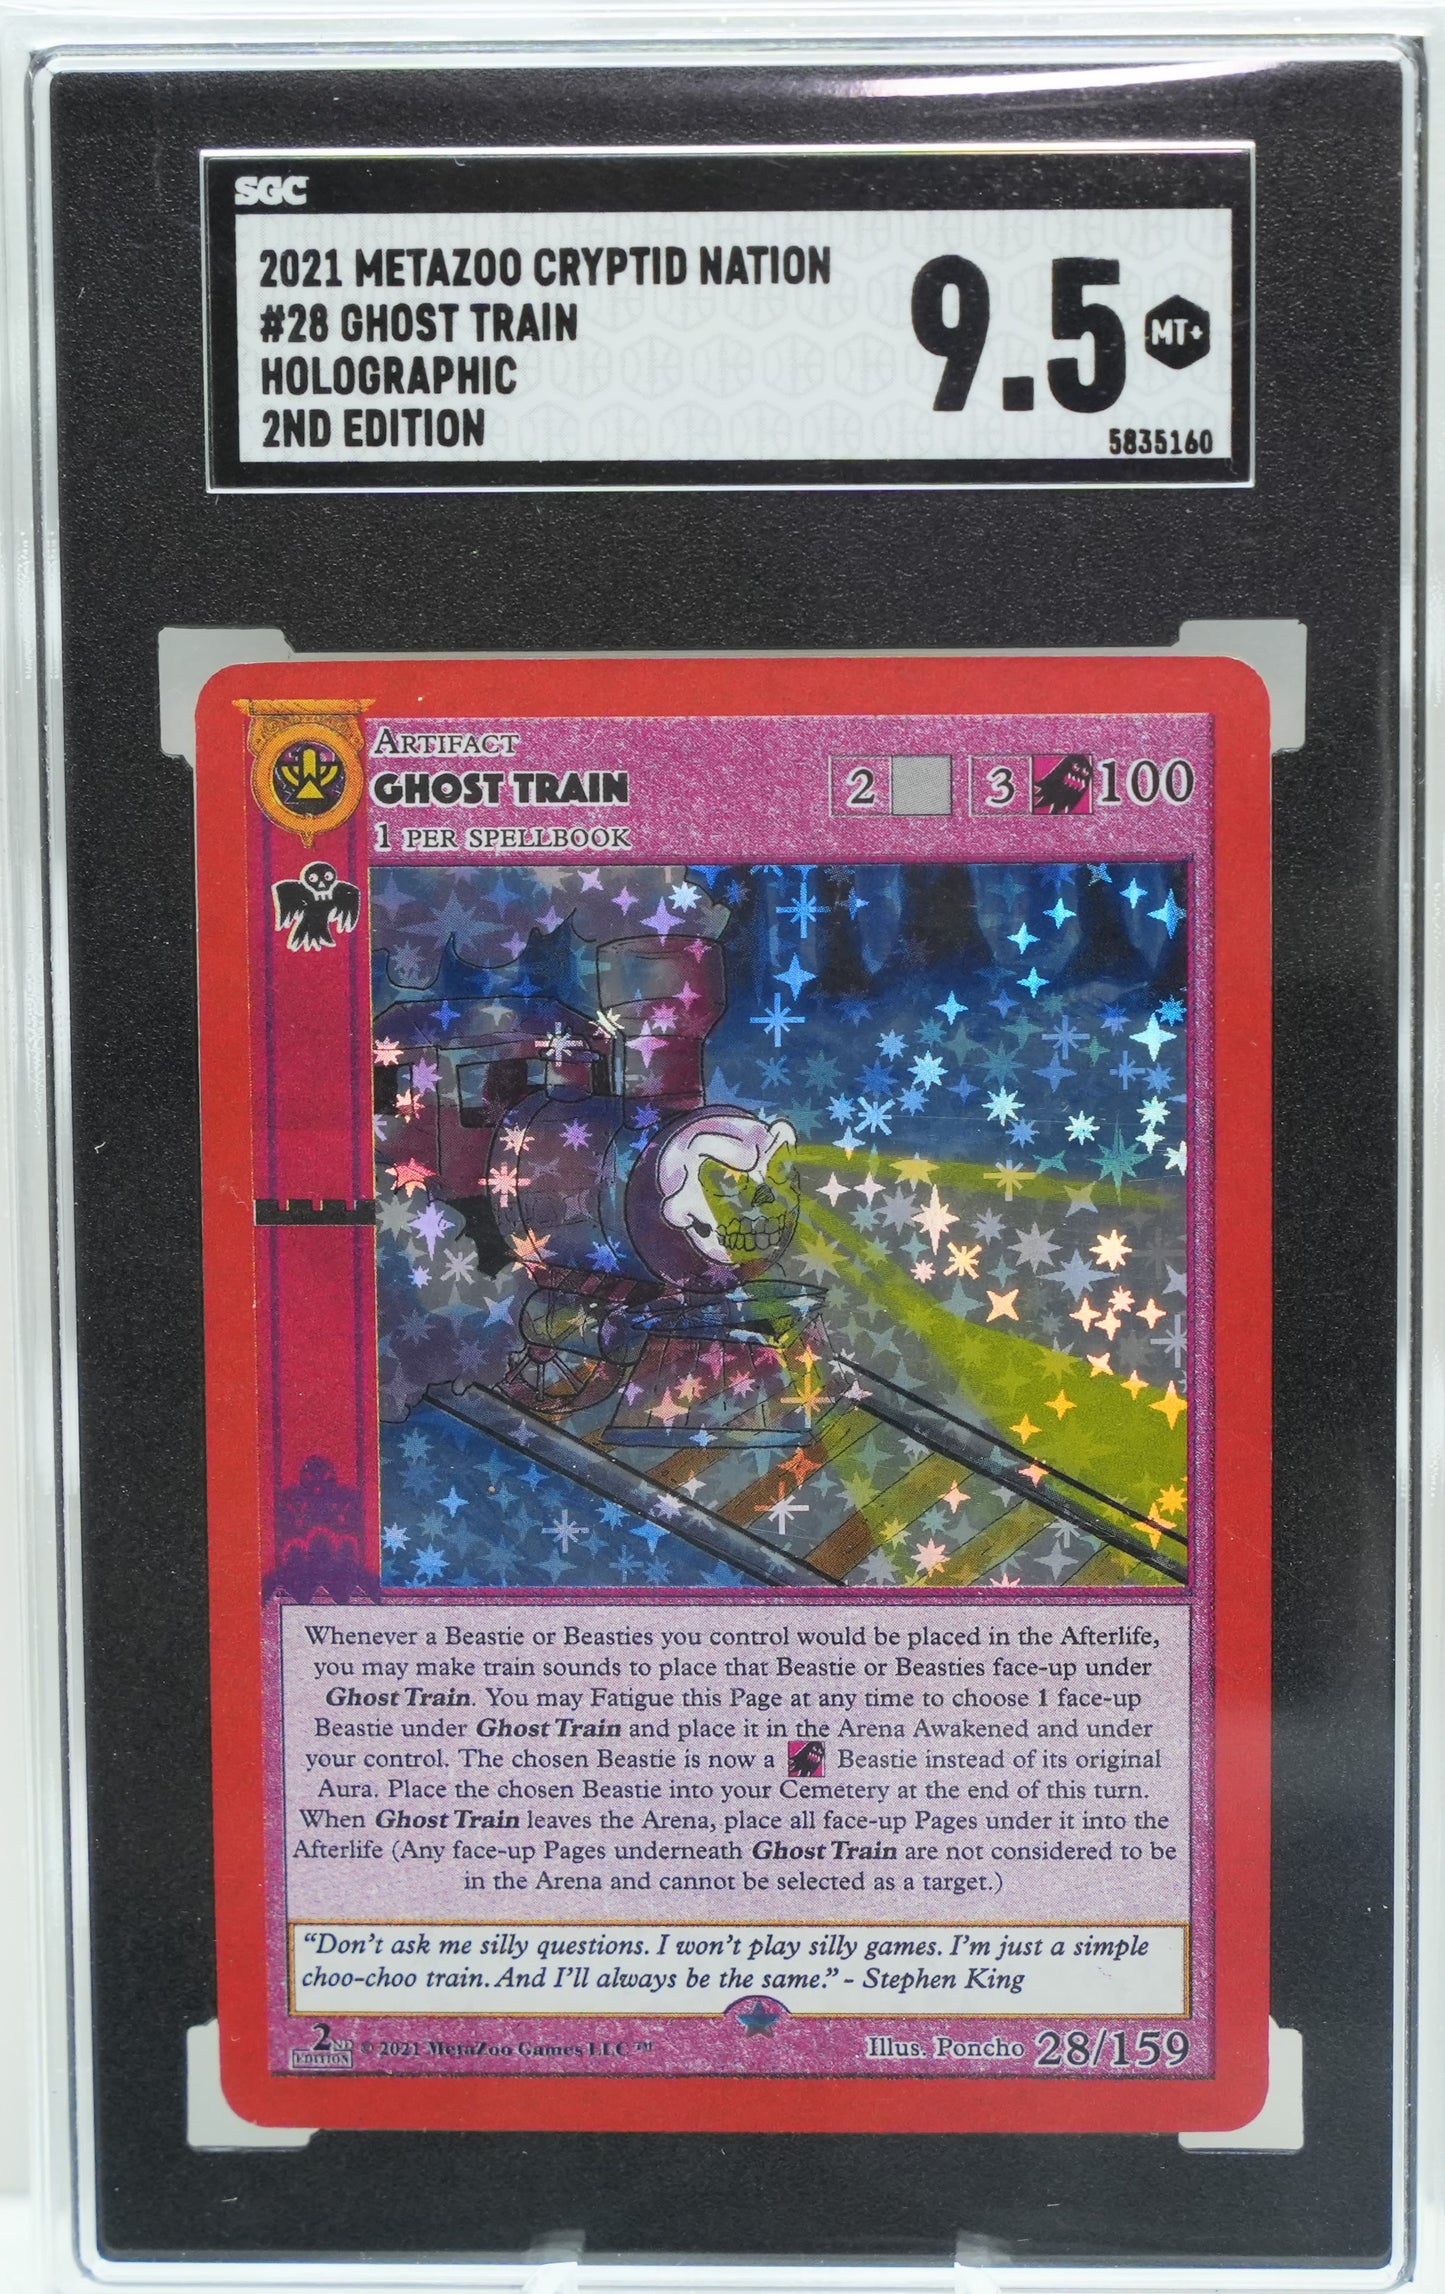 SGC 9.5: 2021 MetaZoo Cryptid Nation 2nd Ed. #28 Ghost Train